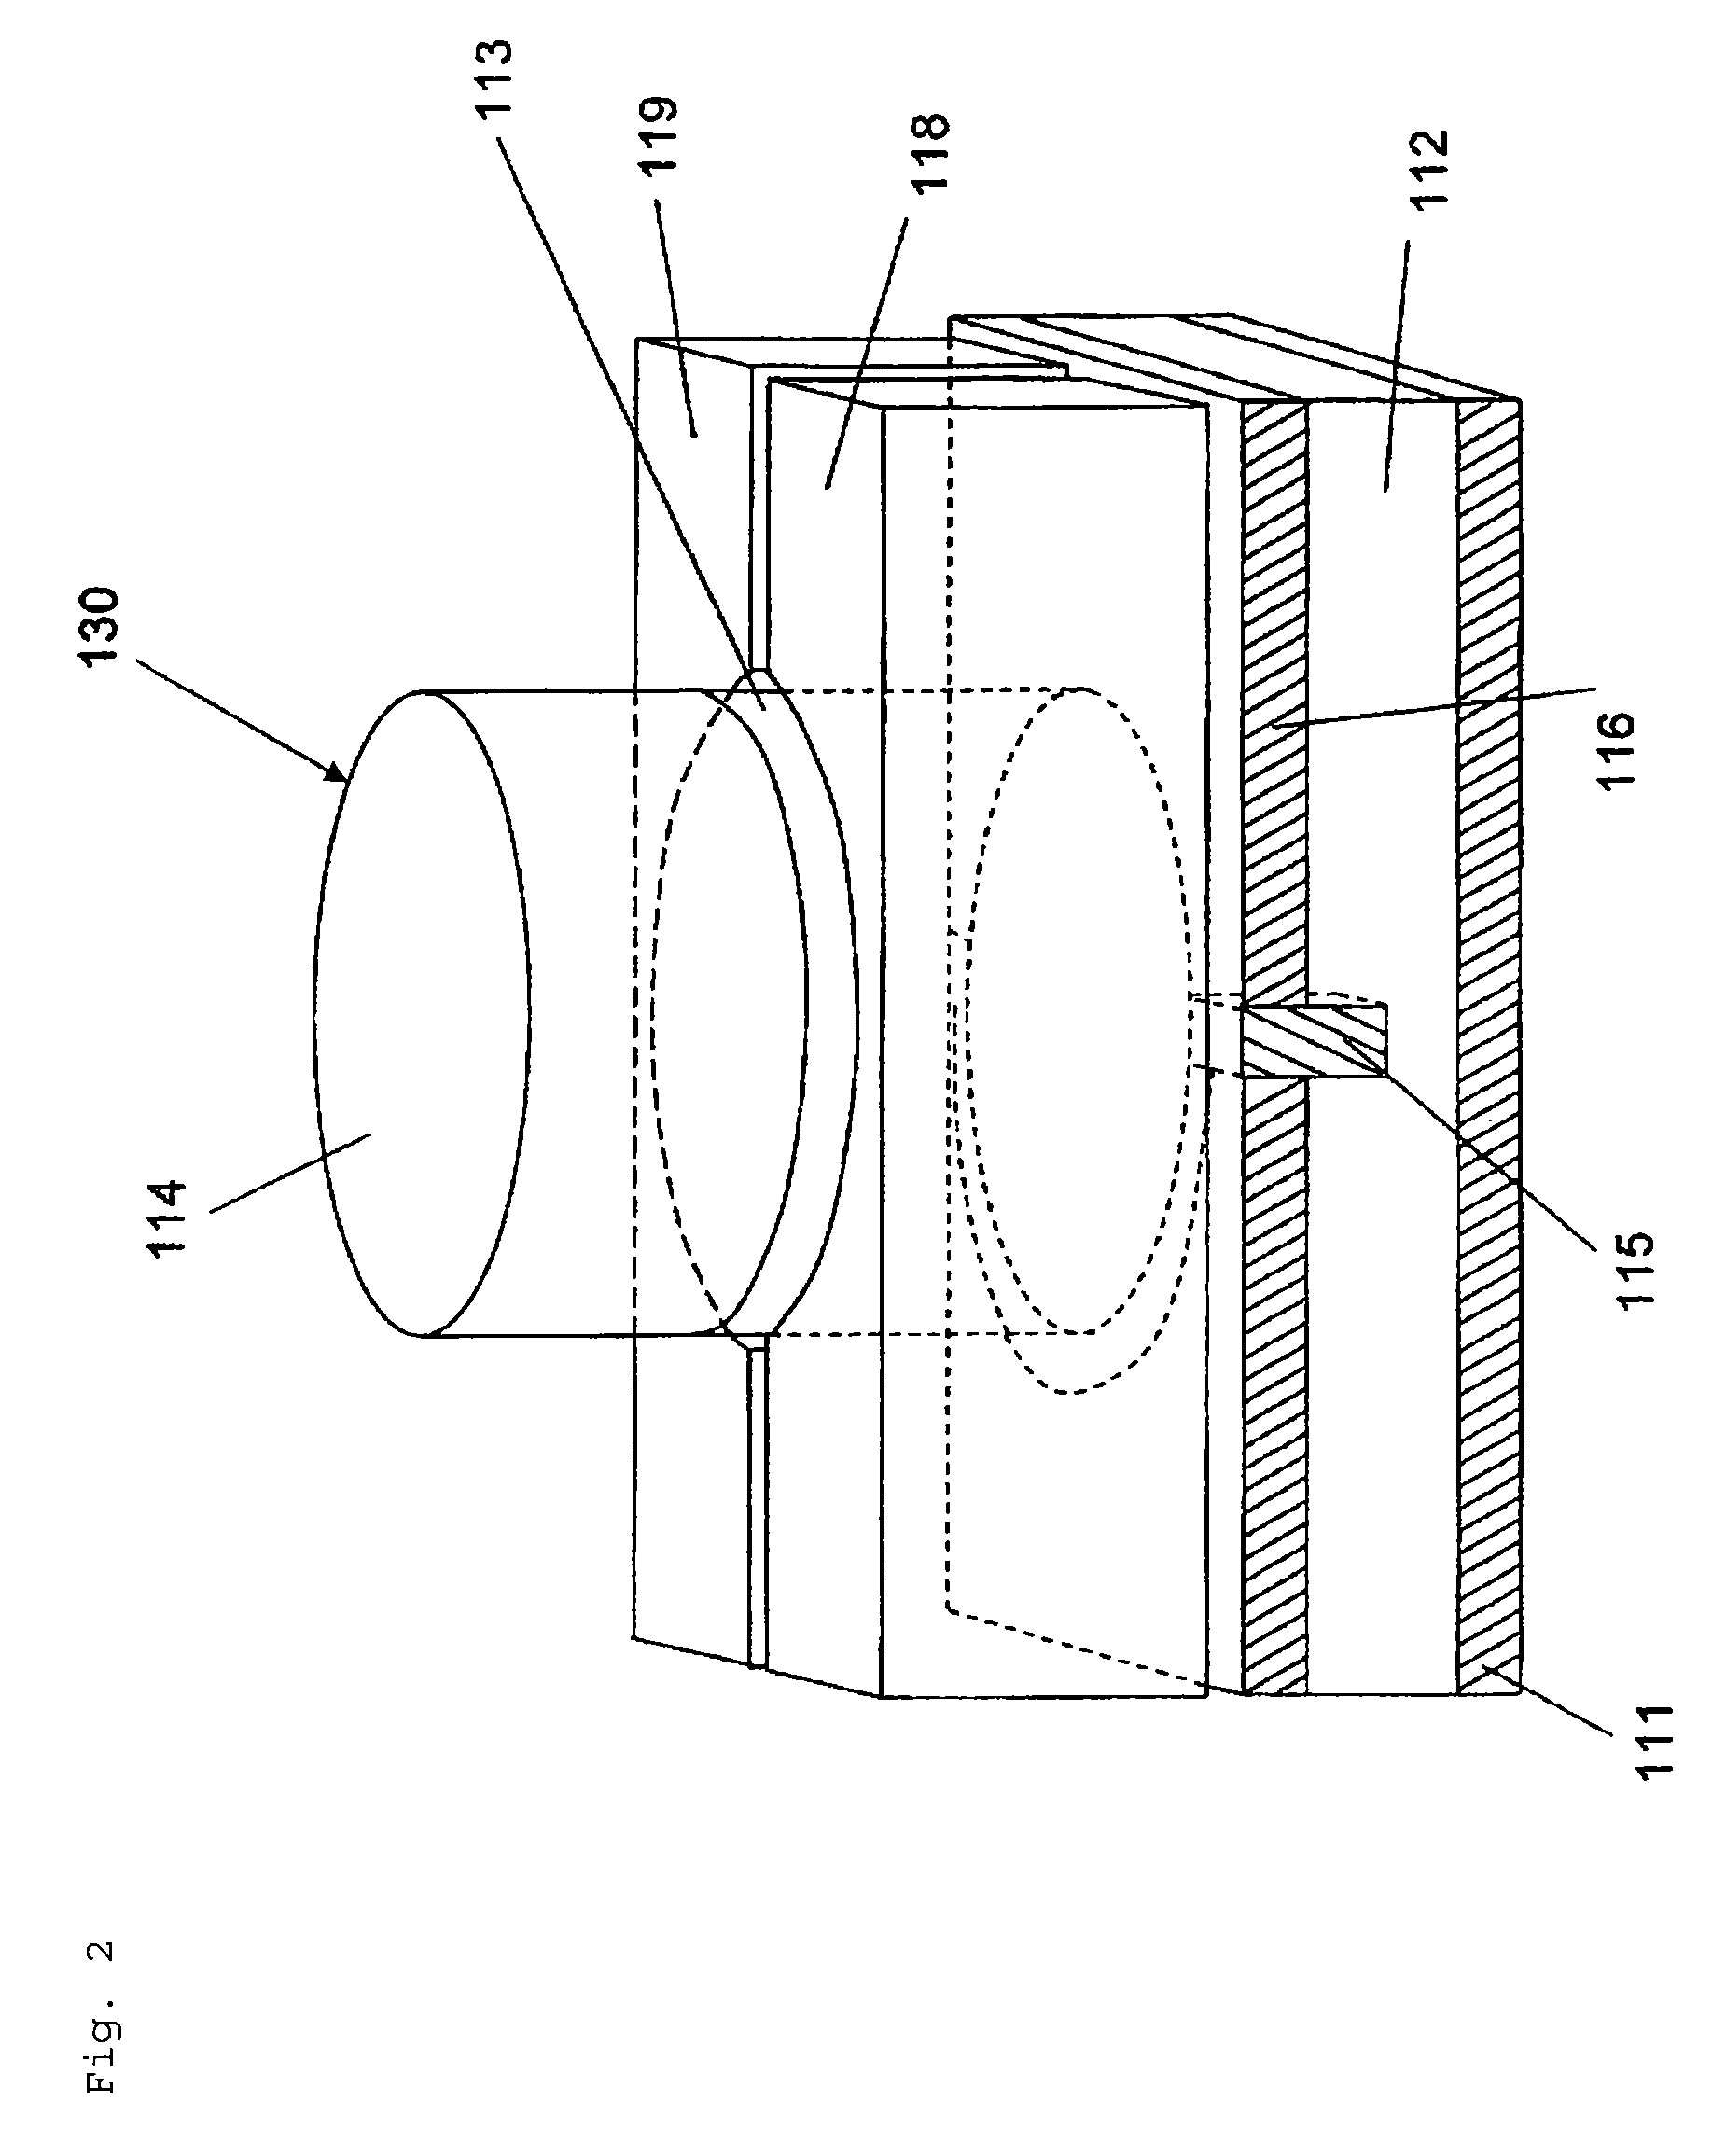 Solid-state image sensor, solid-state image sensing device, and method of producing the same